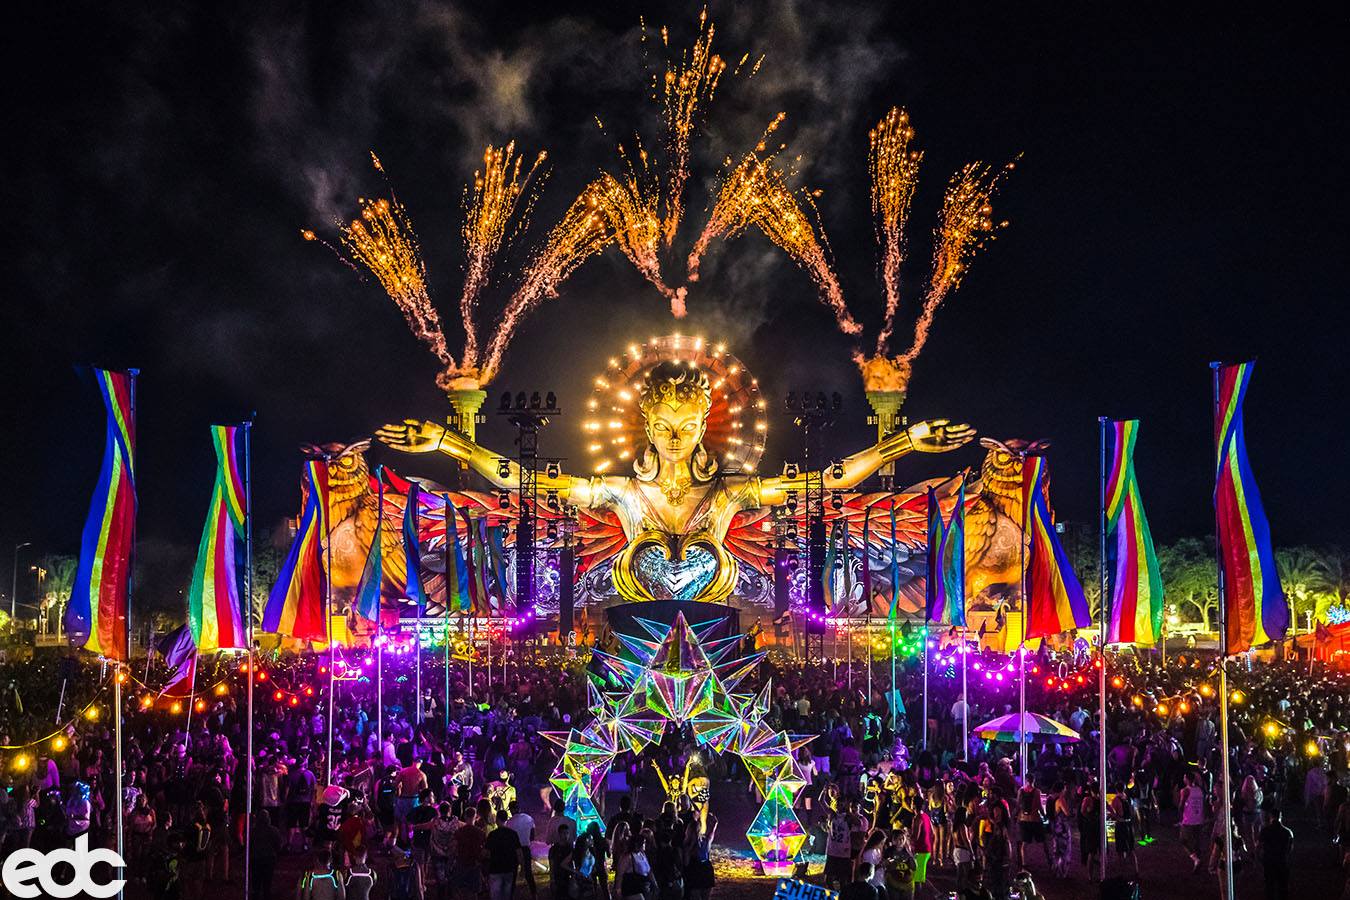 These Electric, Beautiful Photographs From EDC Orlando Are Hypnotizing